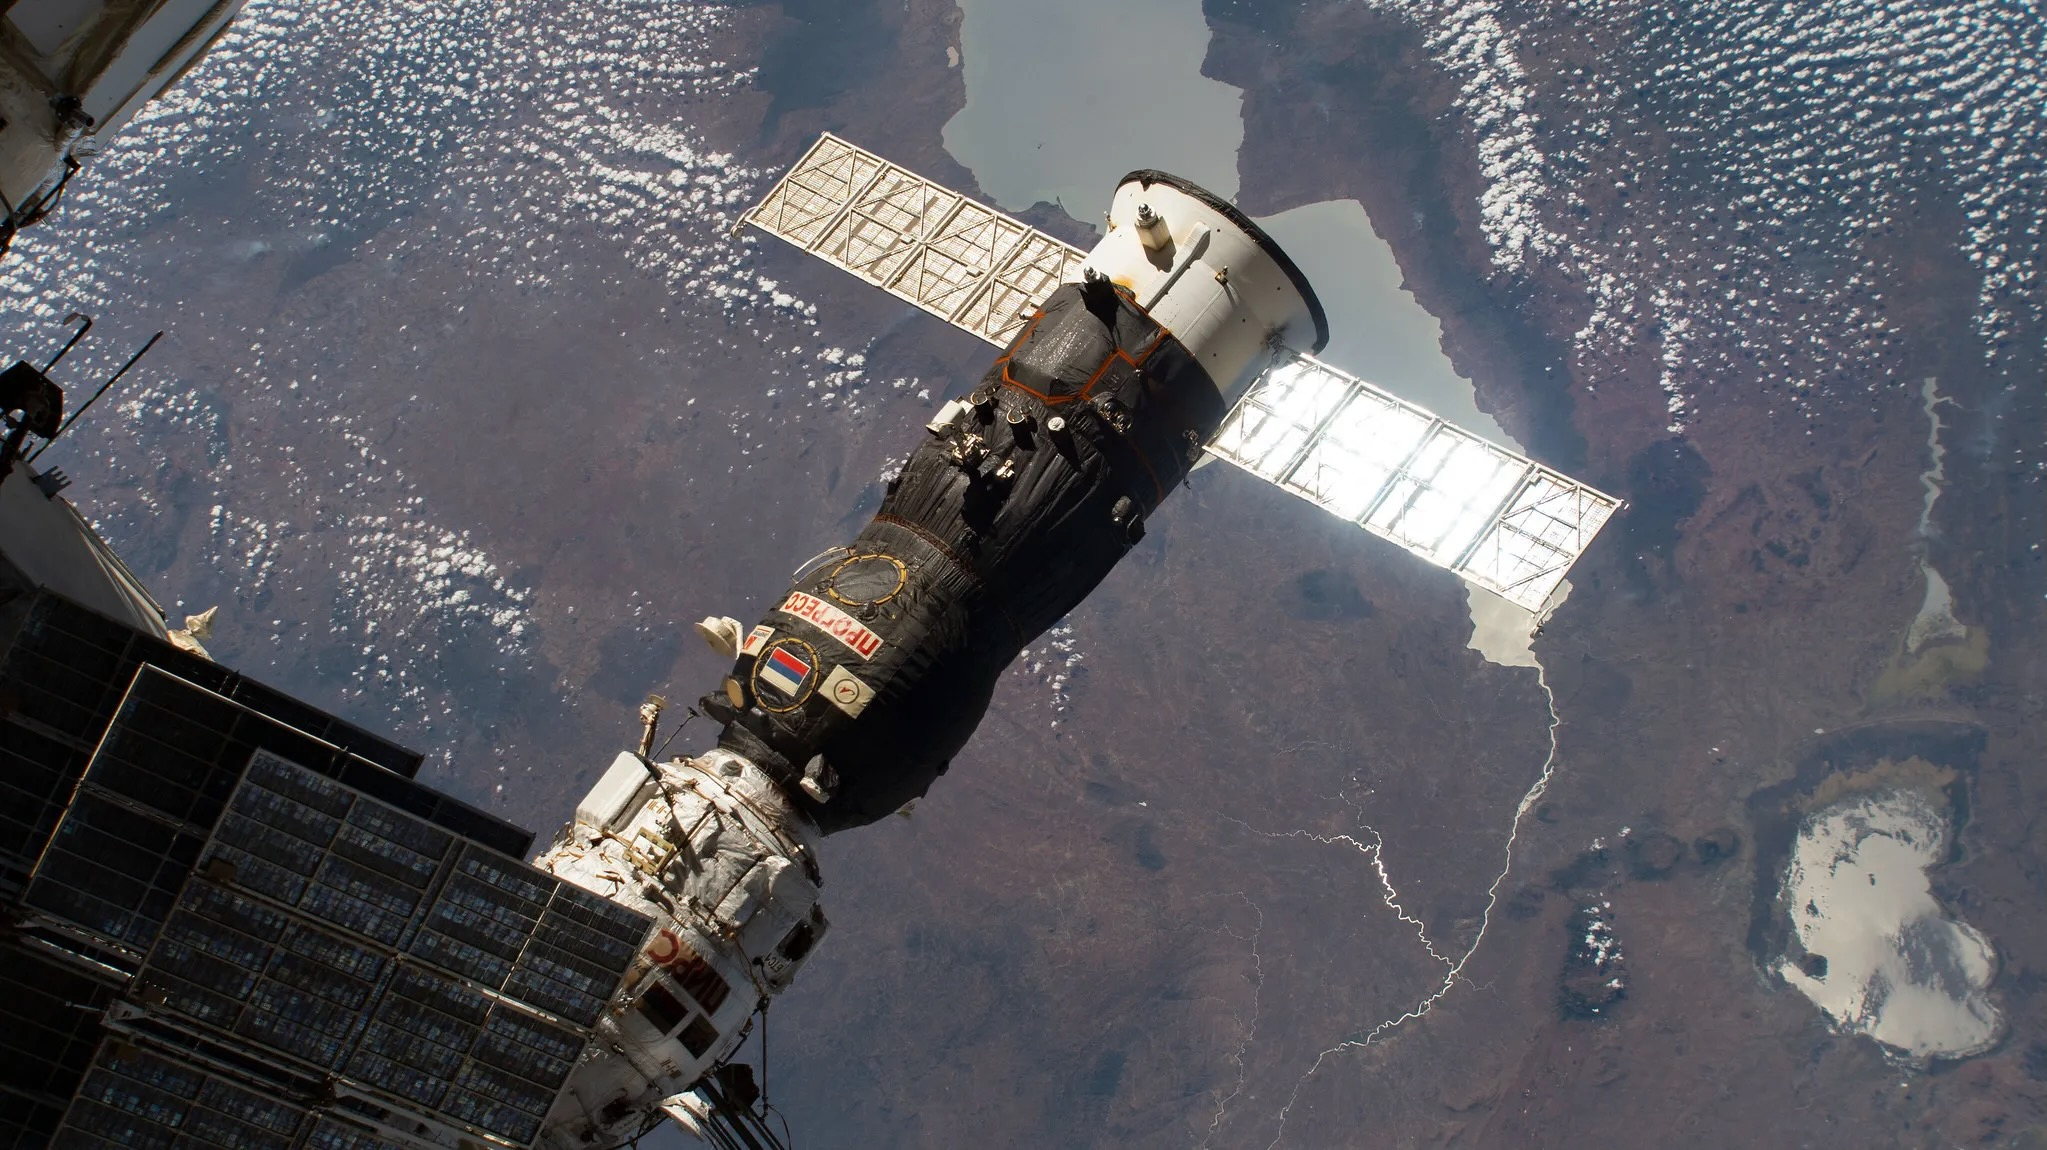 Watch Russian Progress cargo ship arrive at the ISS early Feb. 17 Space